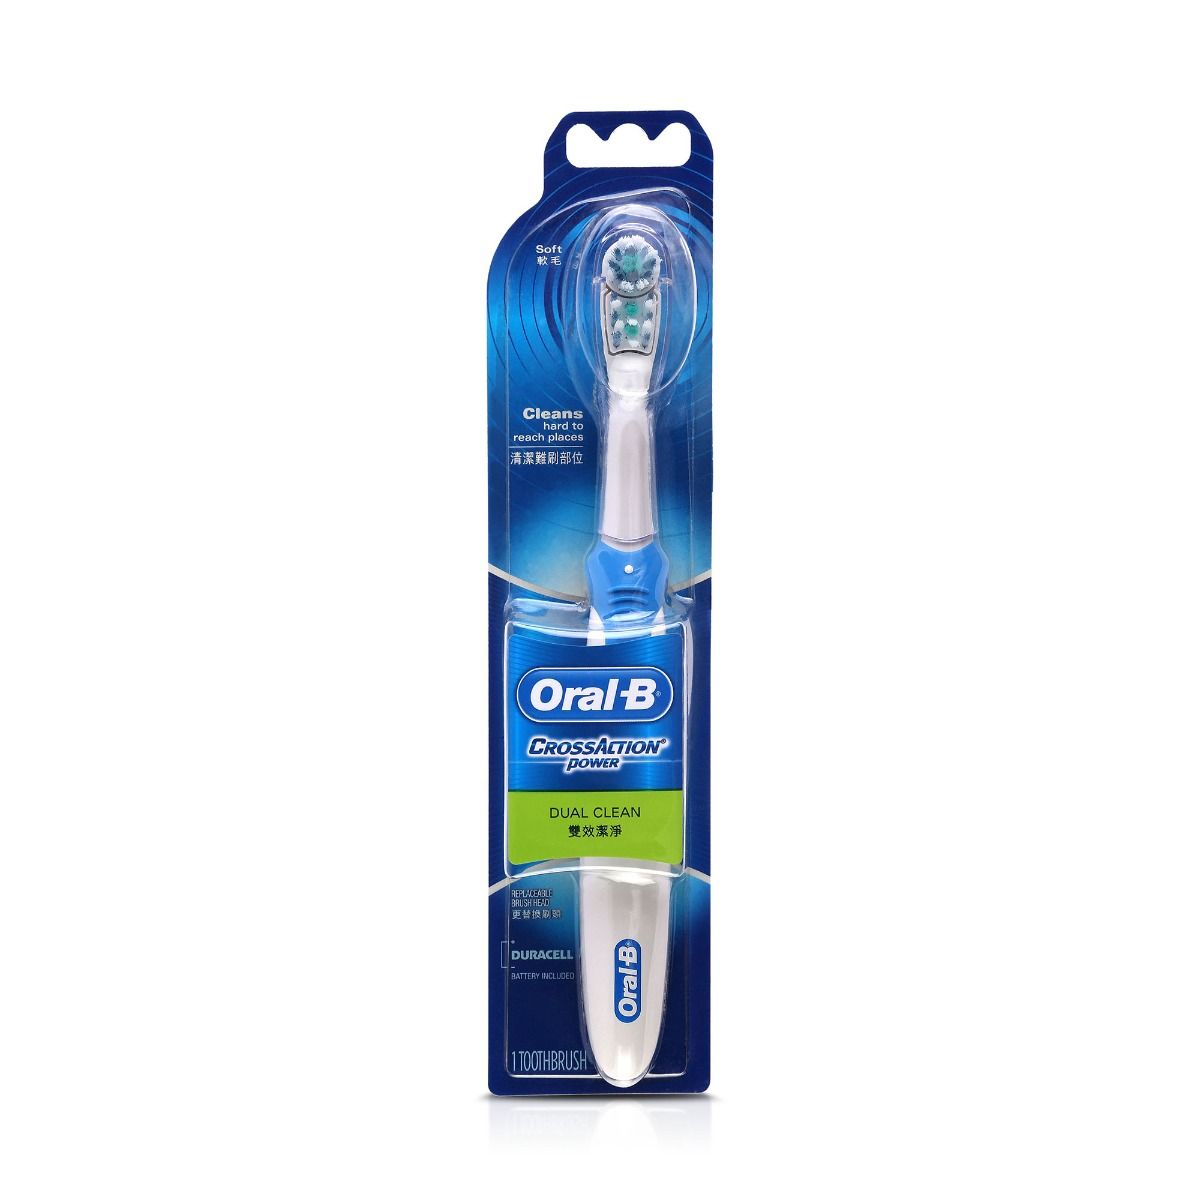 Buy Oral-B Cross Action Battery powered Toothbrush, 1 Count Online